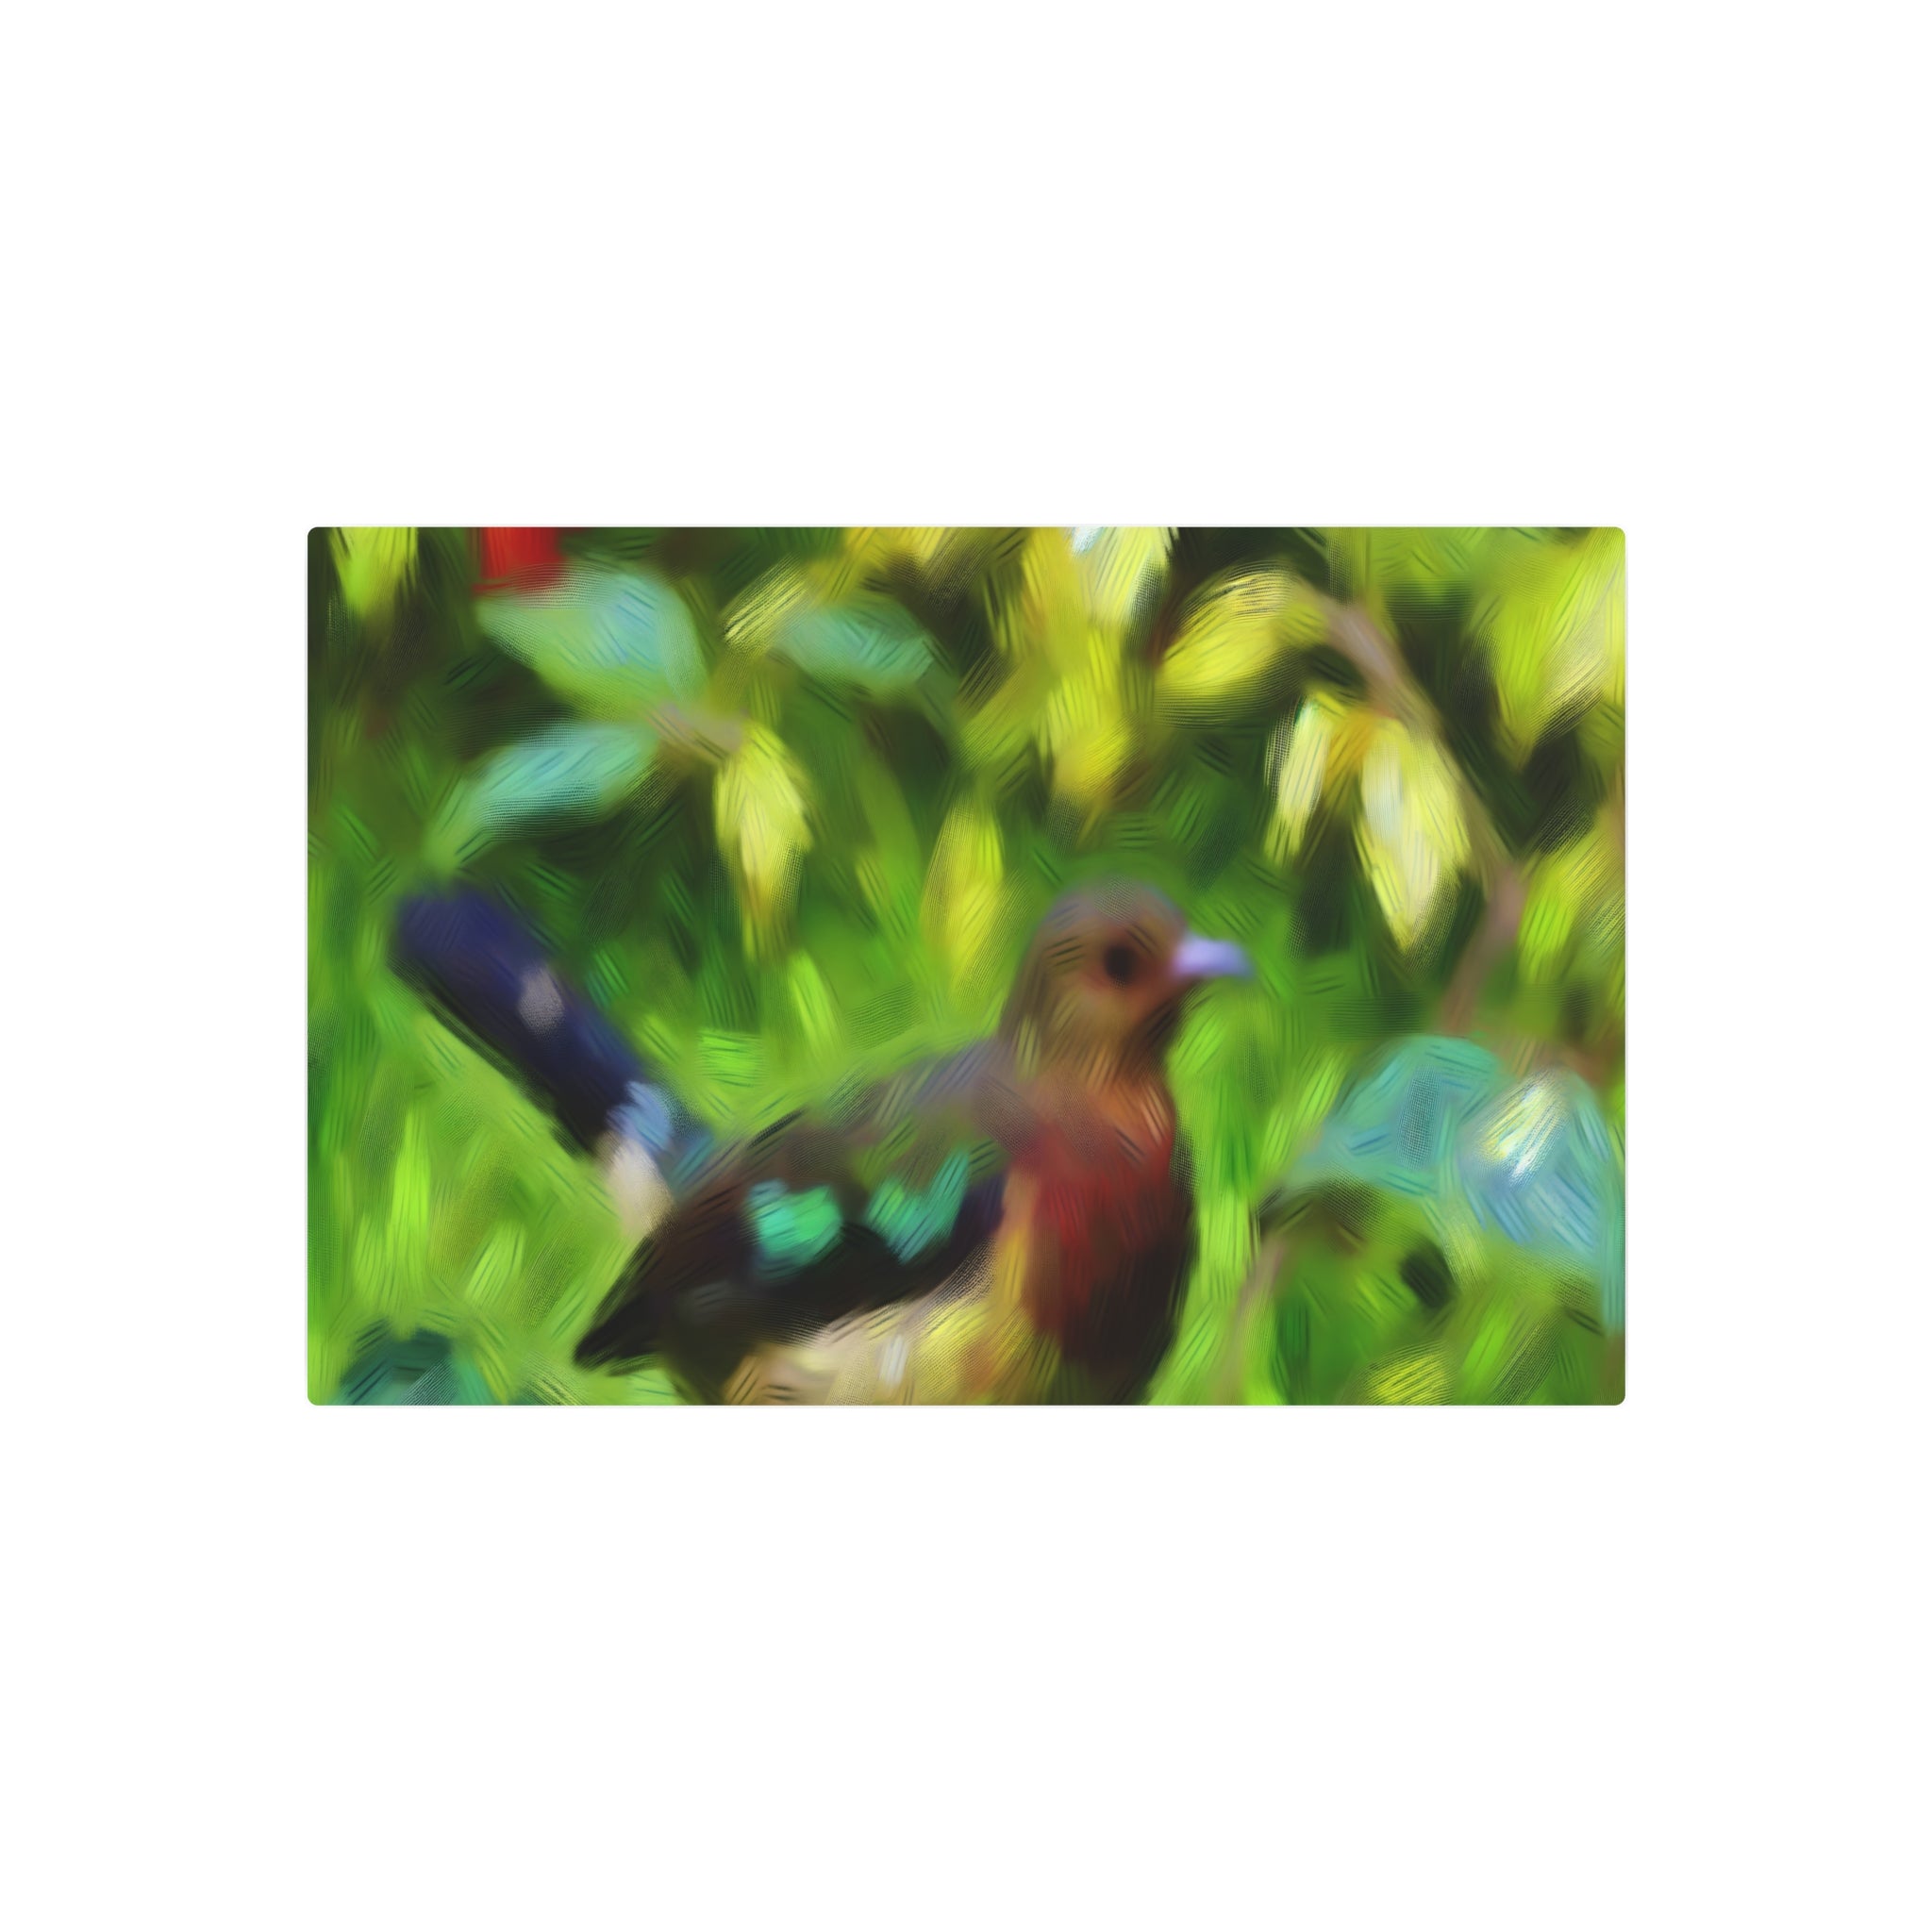 Metal Poster Art | "Impressionist Western Art Style - Nature-Inspired Bird Painting in Impressionism" - Metal Poster Art 30″ x 20″ (Horizontal) 0.12''